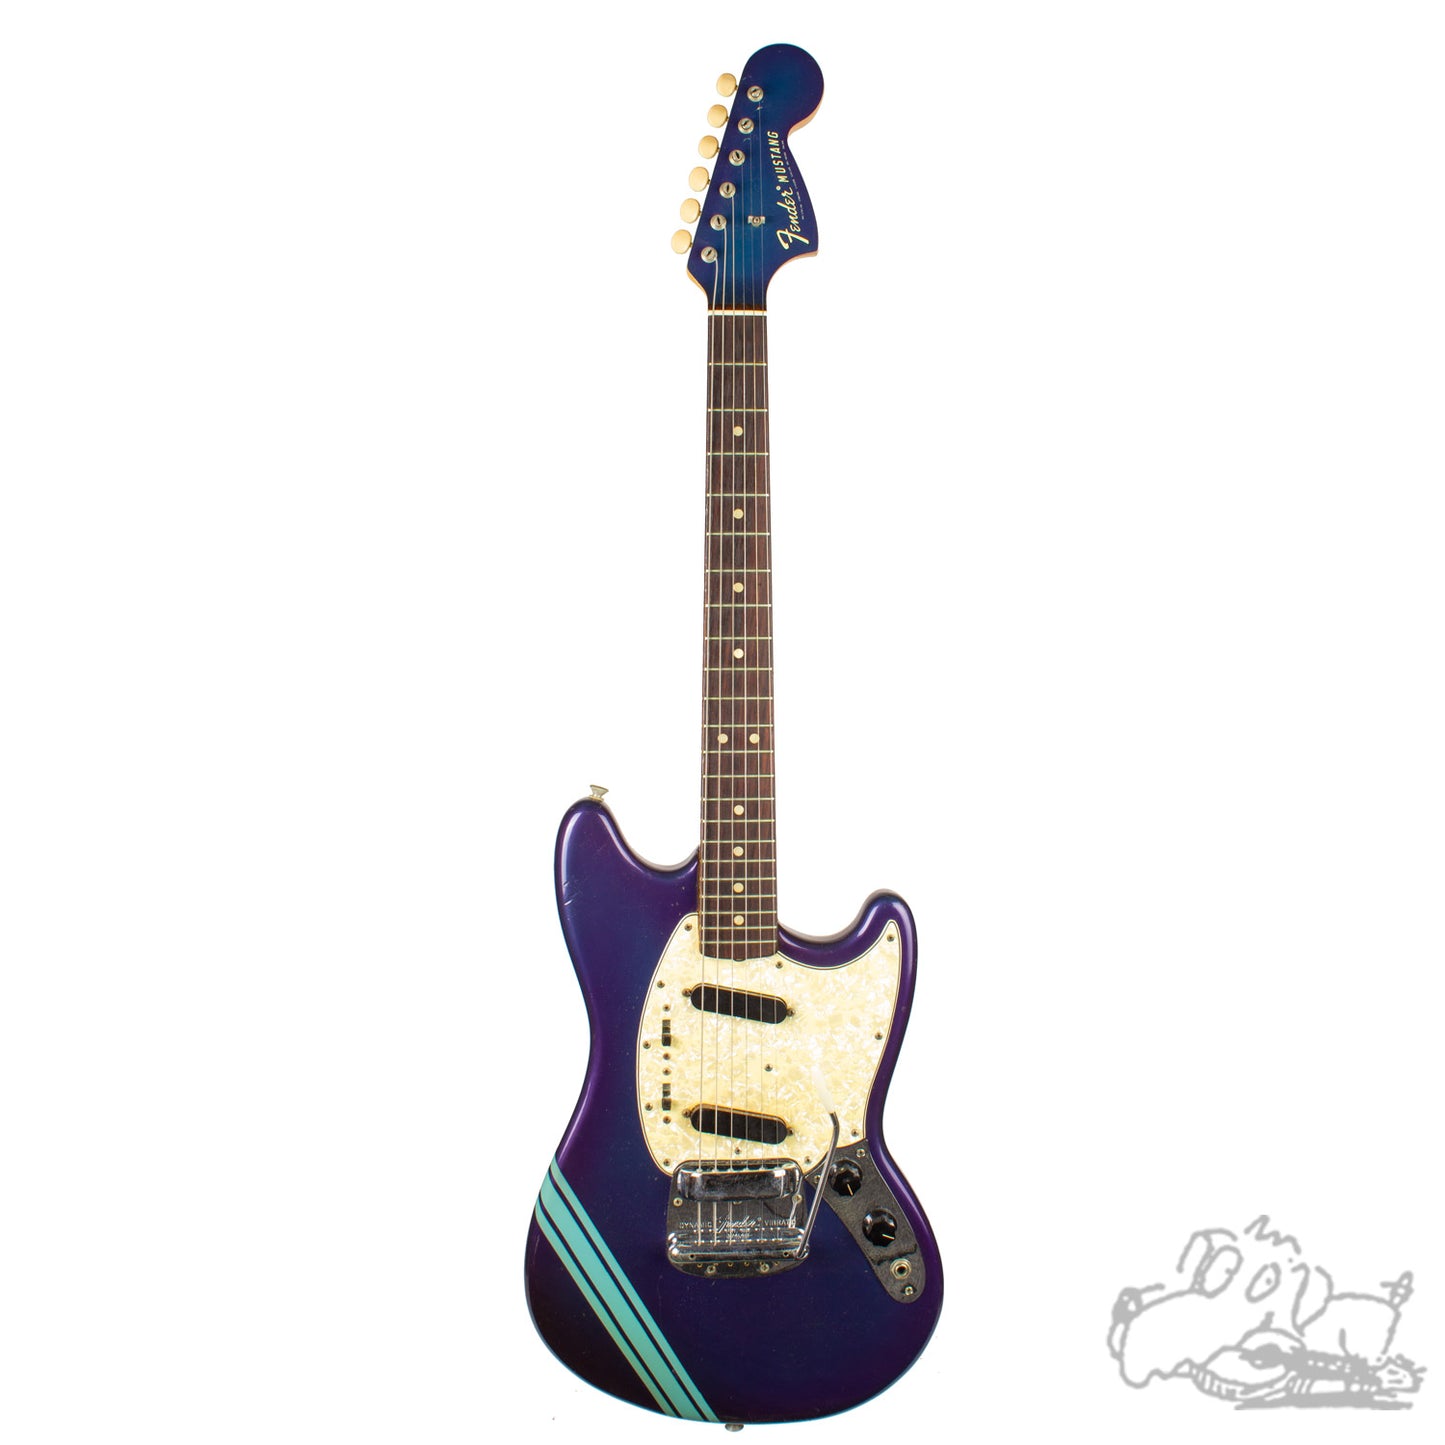 1968 Competition Blue Fender Mustang